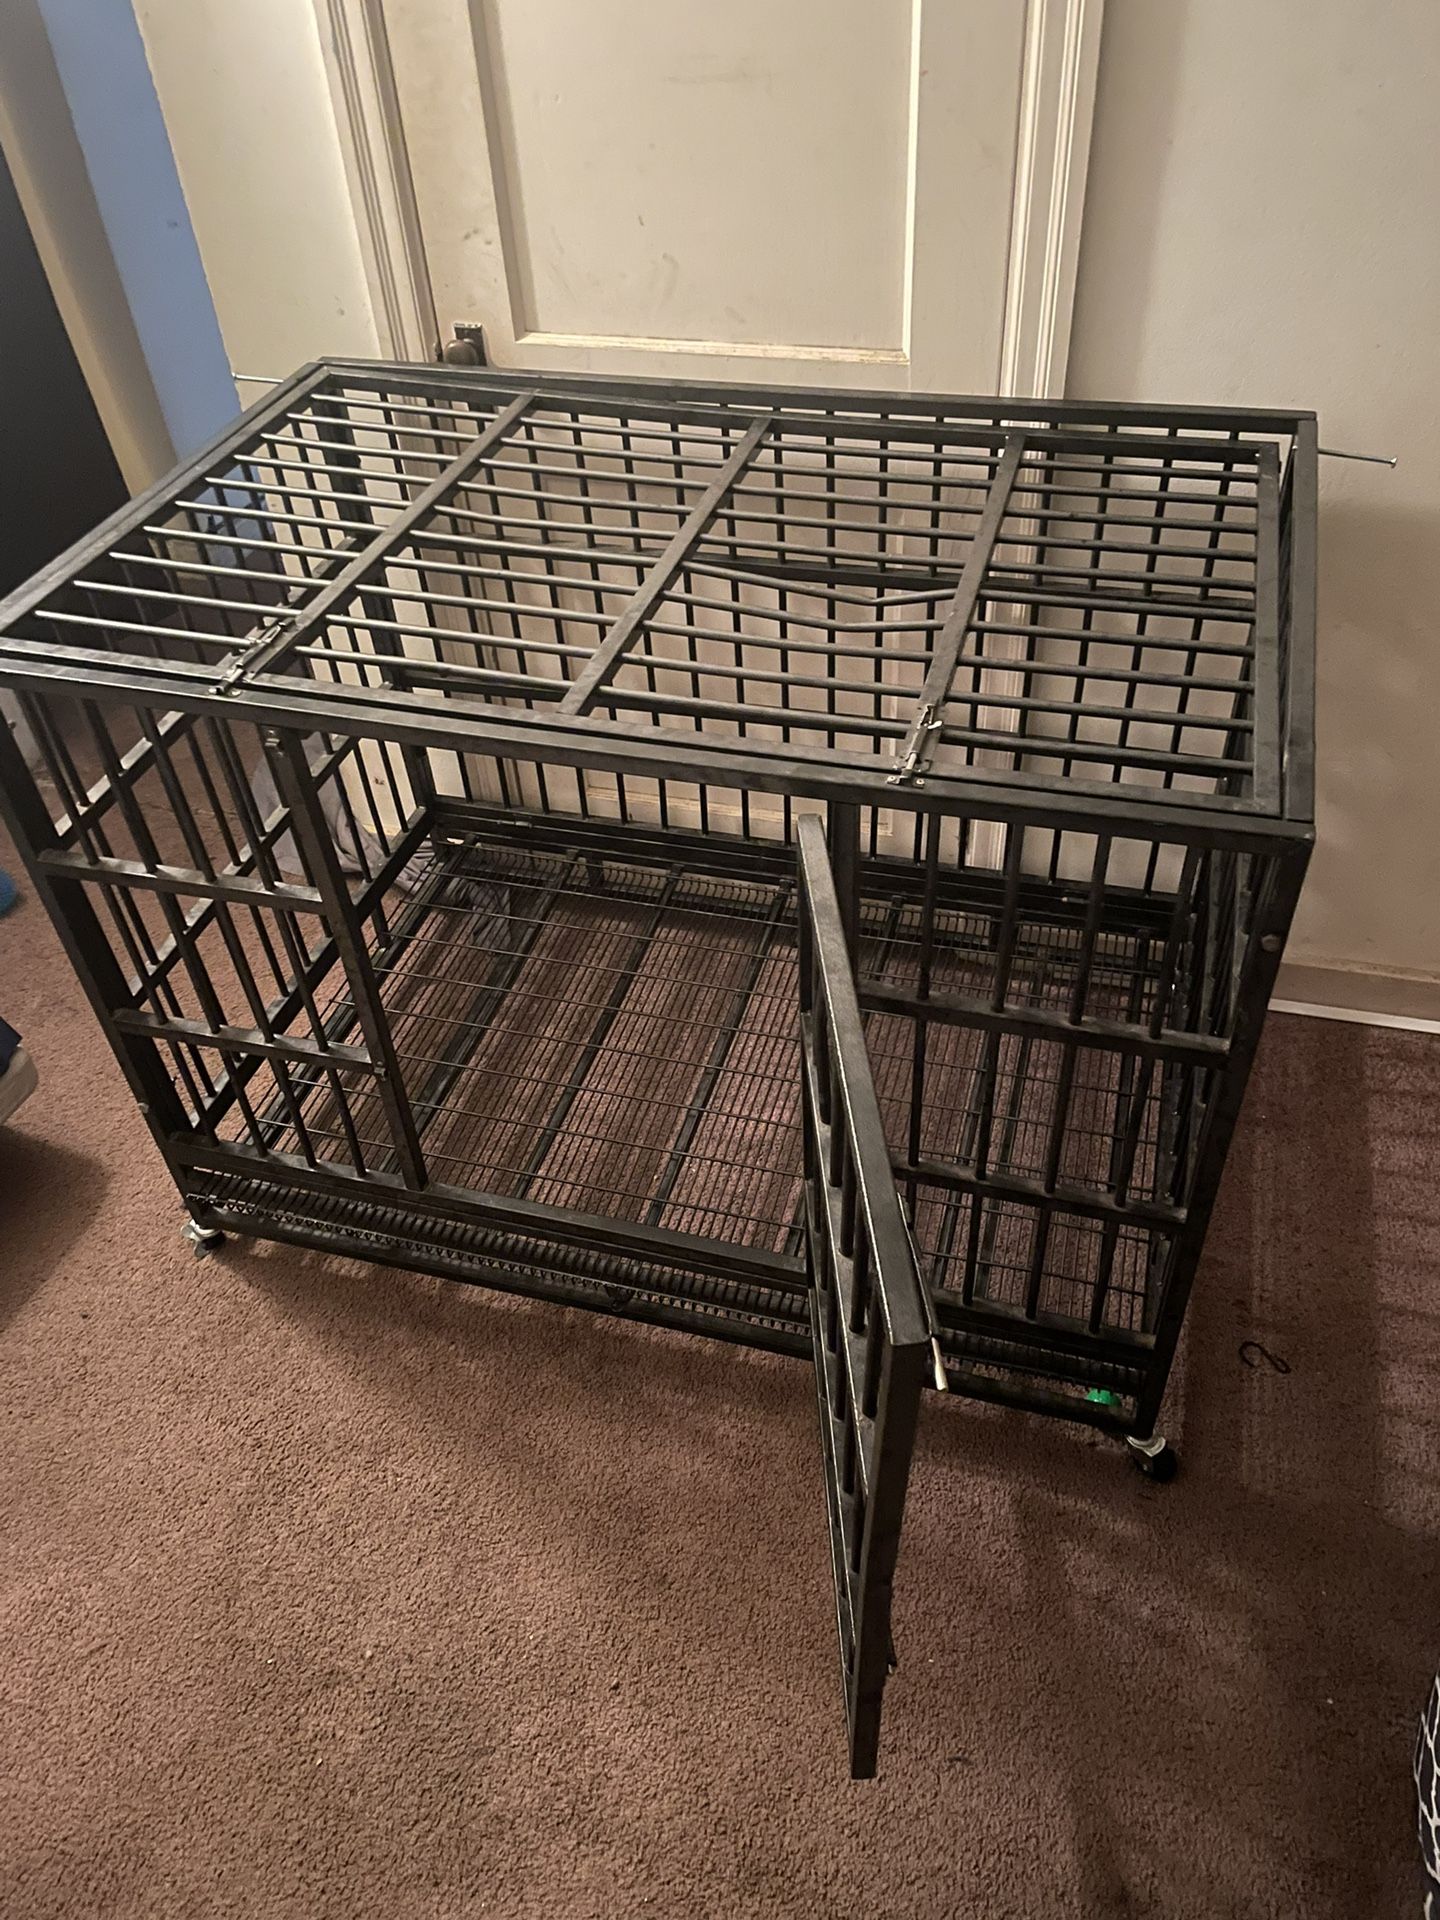 Large  Breed Dog Crate 